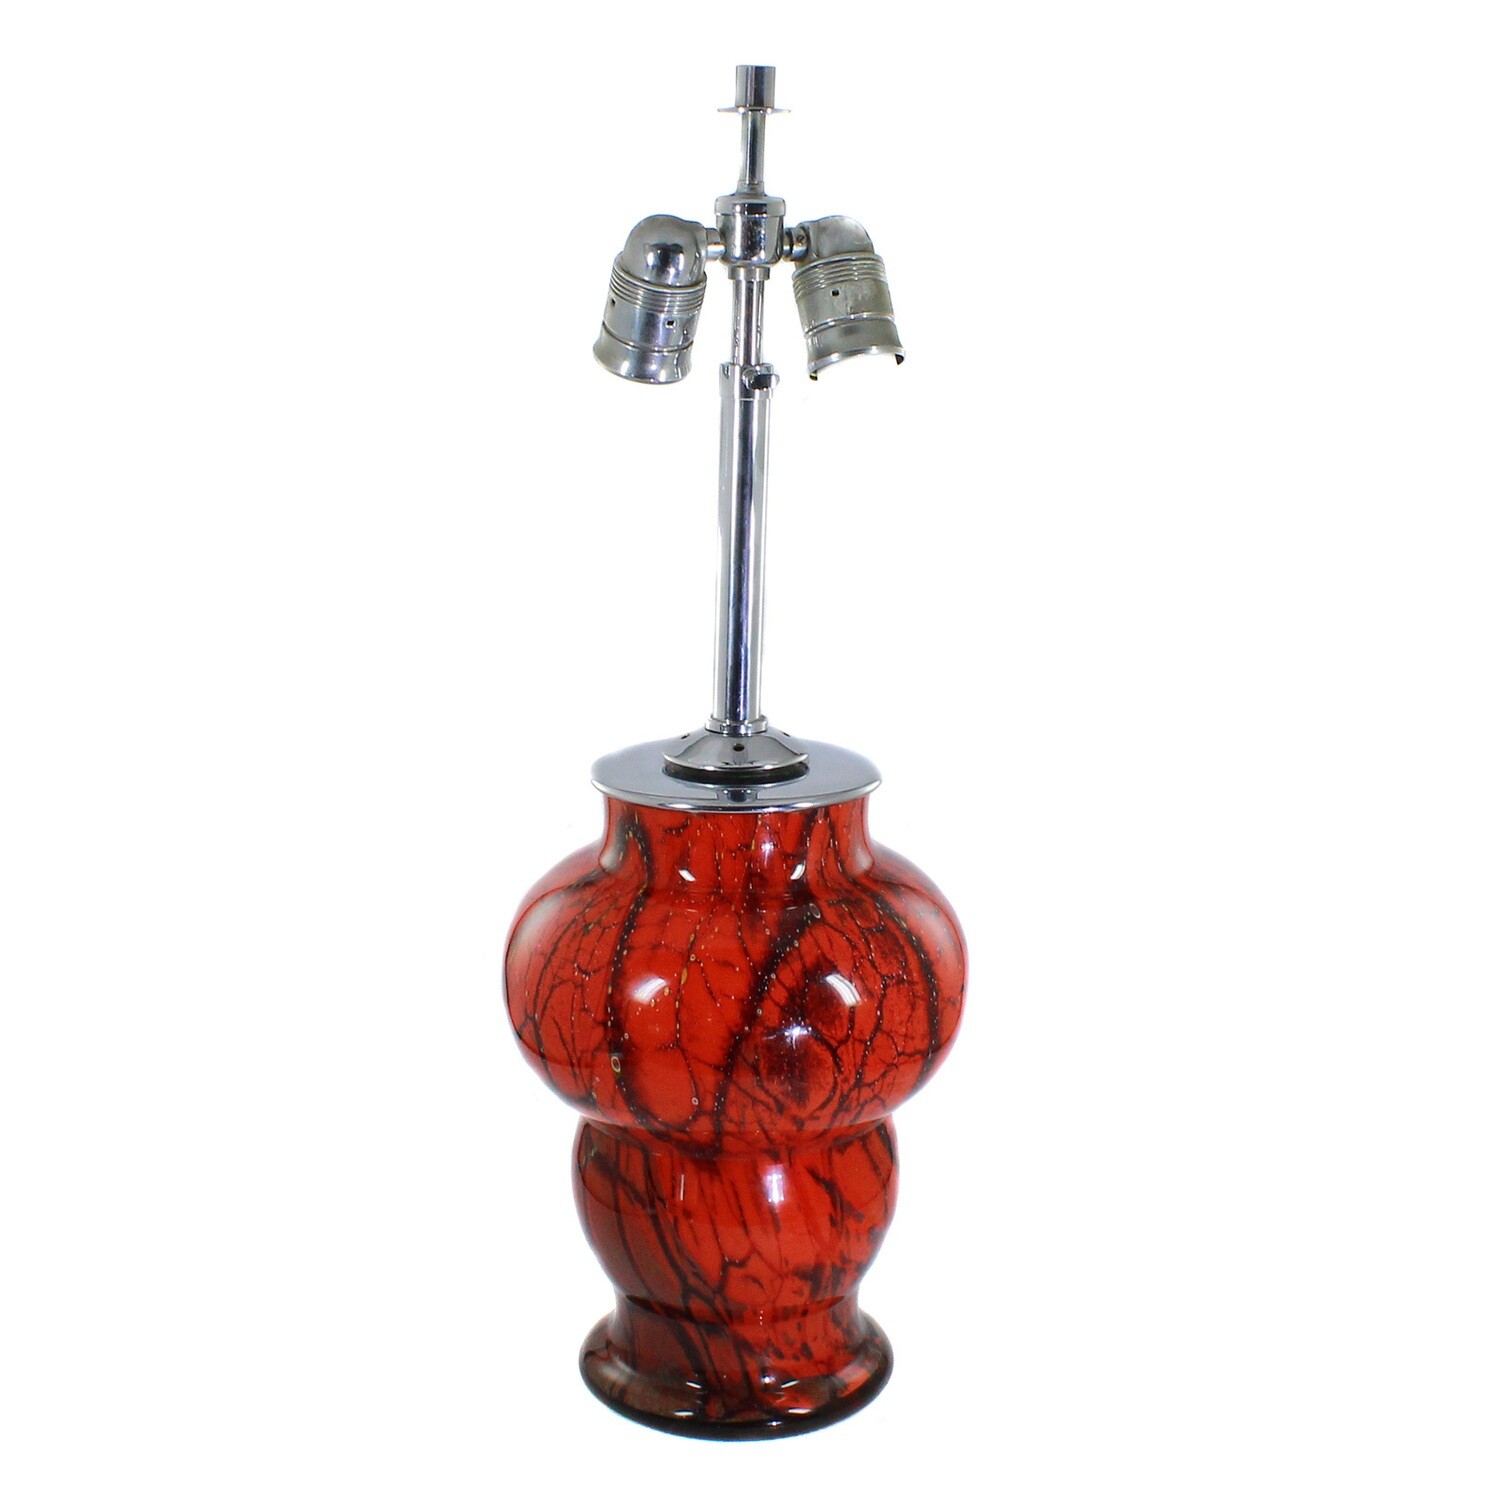 WMF Ikora lamps made of red underlaid glass with melts, around 1930